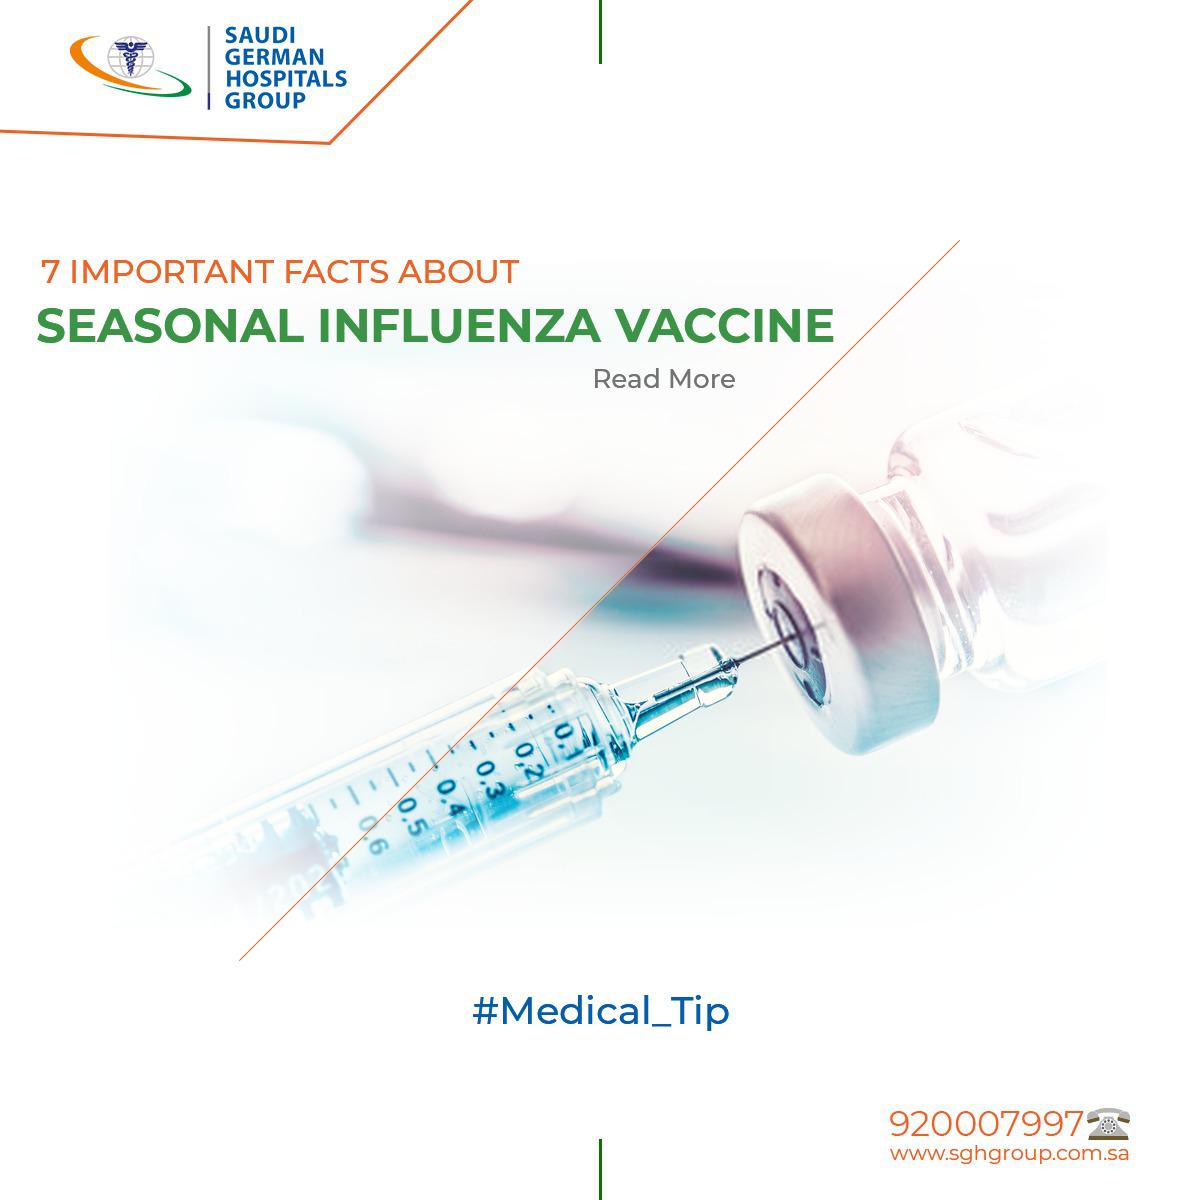 7 Important facts about seasonal influenza vaccine